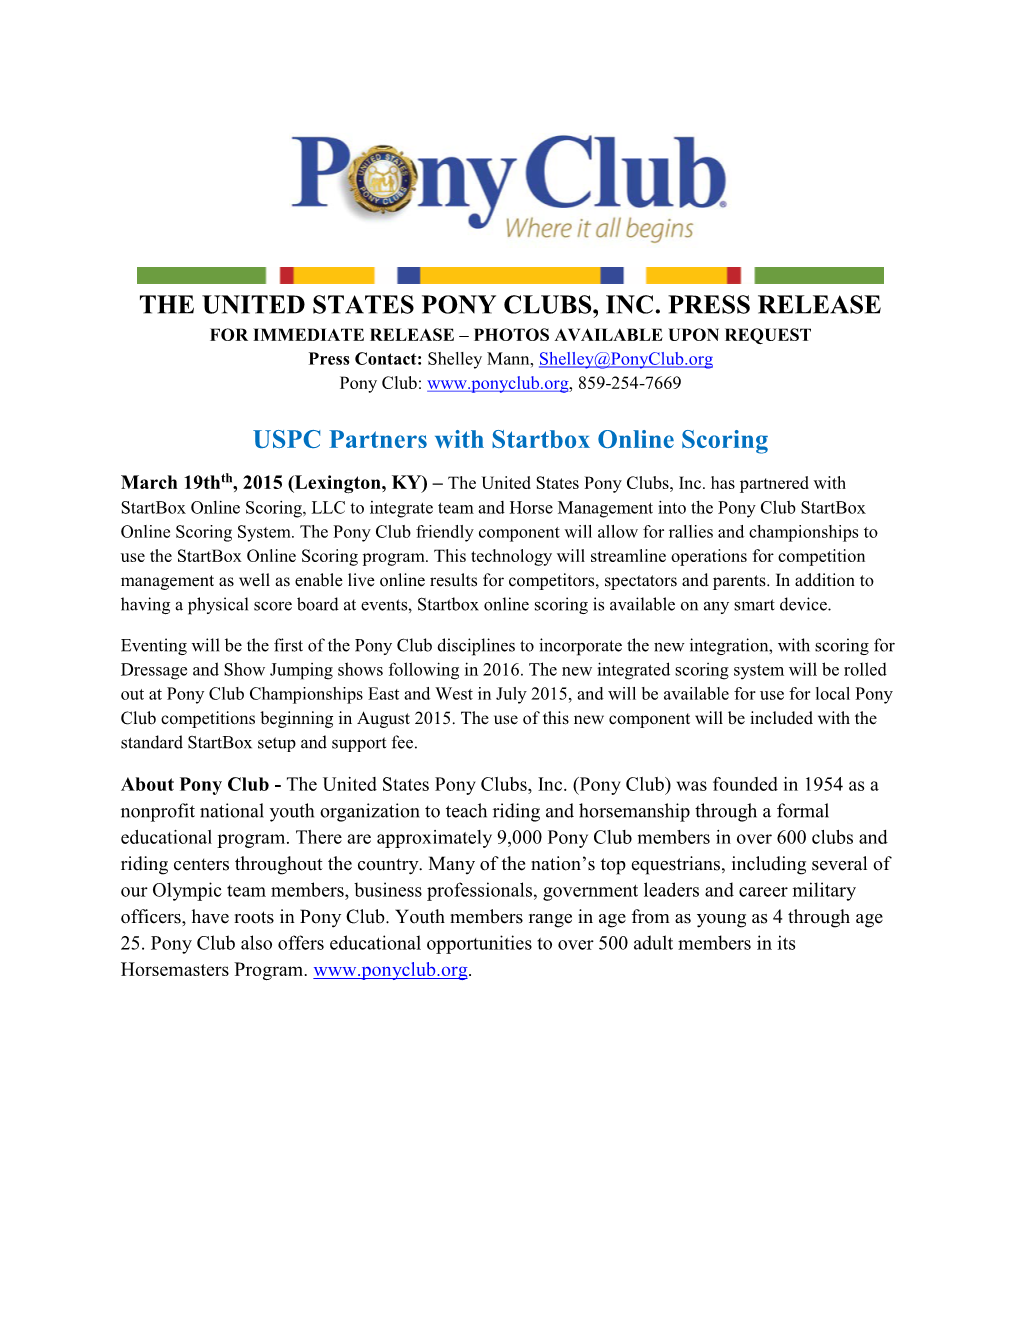 The United States Pony Clubs, Inc. Press Release Uspc